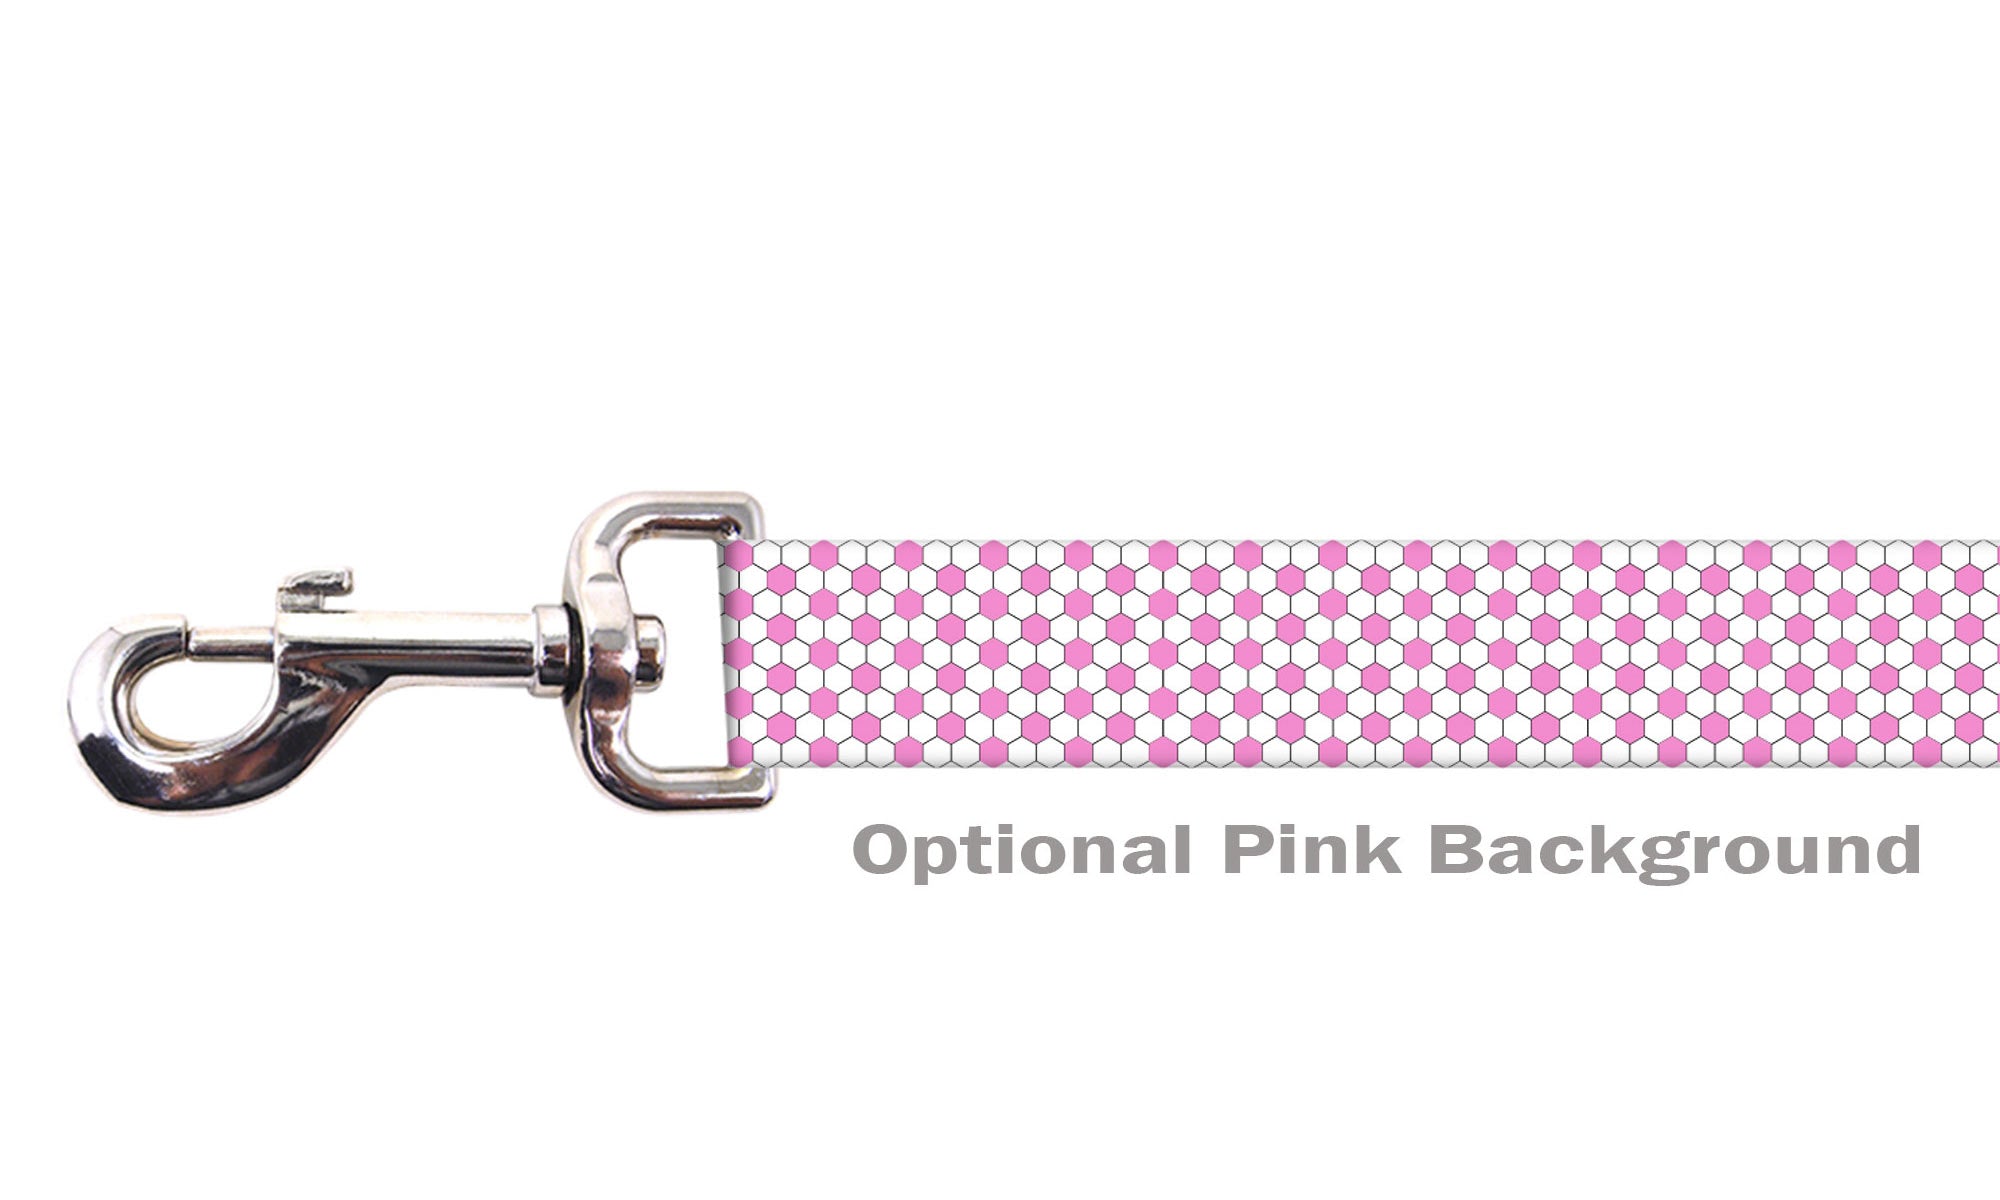 Macedonia Dog Leash for Soccer Fans | Black or Pink | 6 or 4 Foot